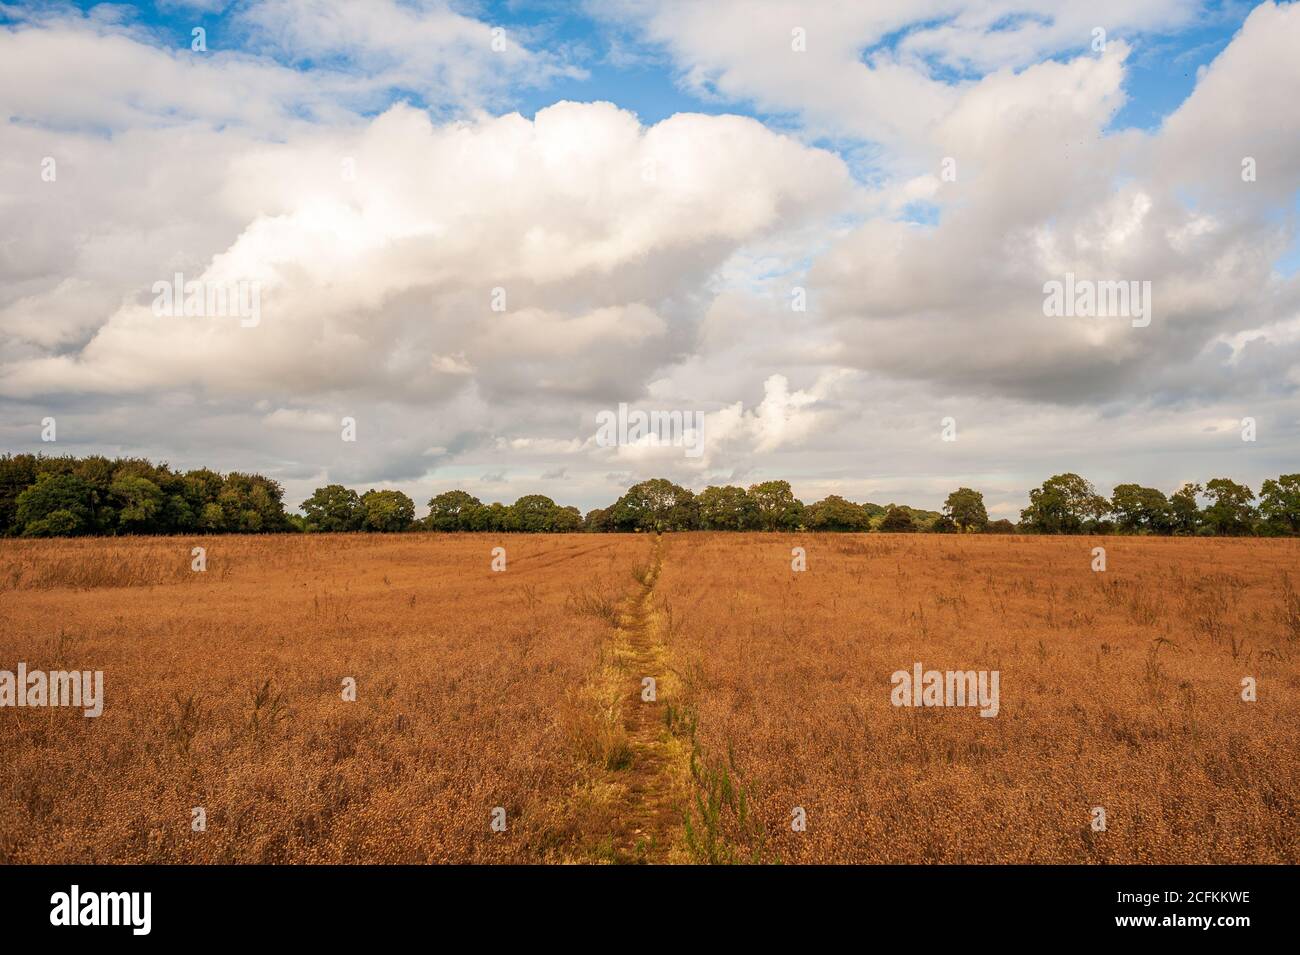 Whitsbury, Hampshire, UK, 6th September 2020, Weather: An autumnal feelin on Sunday afternoon but feeling warm with the prospect of a very warm week ahead. Arable farmland exudes autumn colours under fluffy white clouds and blue sky. Credit: Paul Biggins/Alamy Live News Stock Photo